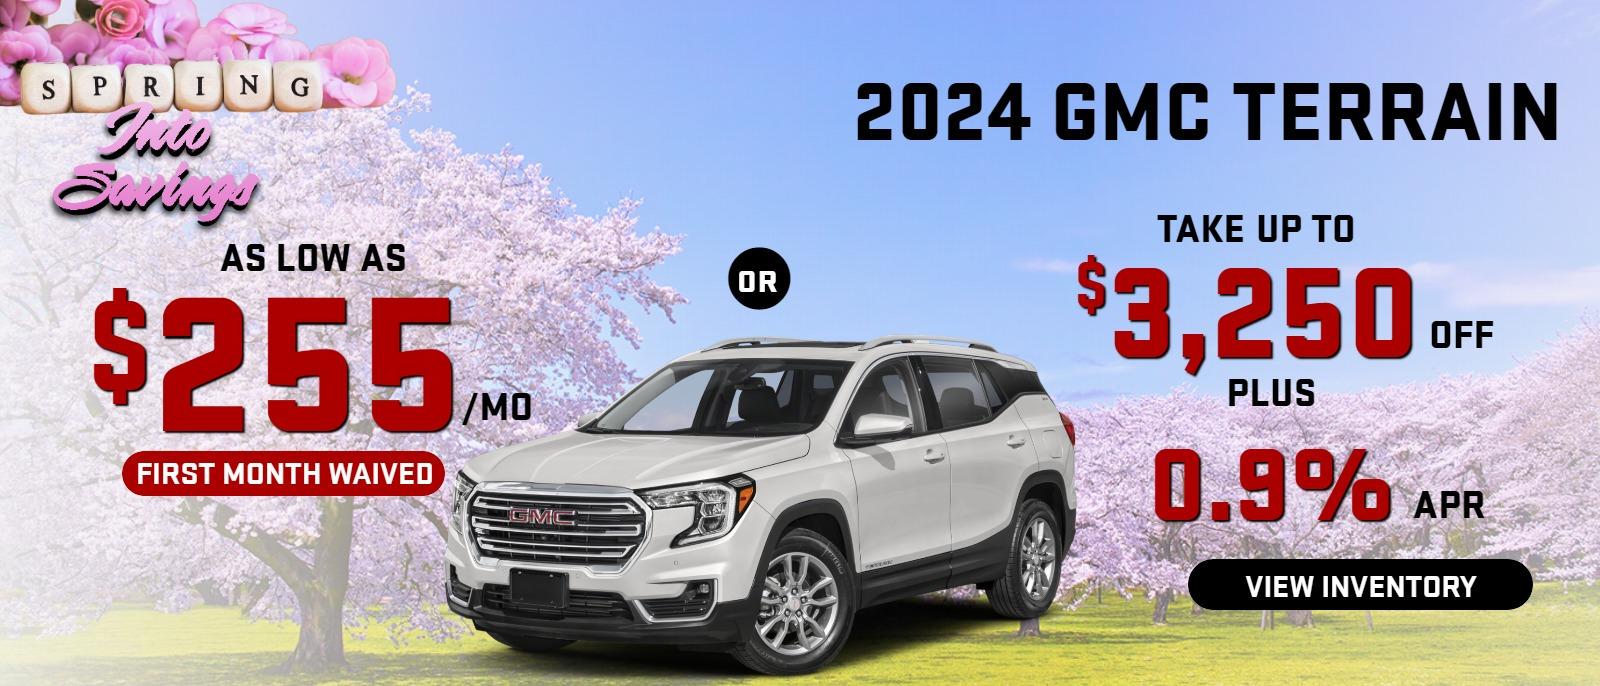 2024 Terrain
stock G2966

take up to $3250 OFF 
& 0.9% FINANCE
OR AS LOW AS 
$ 255/MO
 (first month waived)